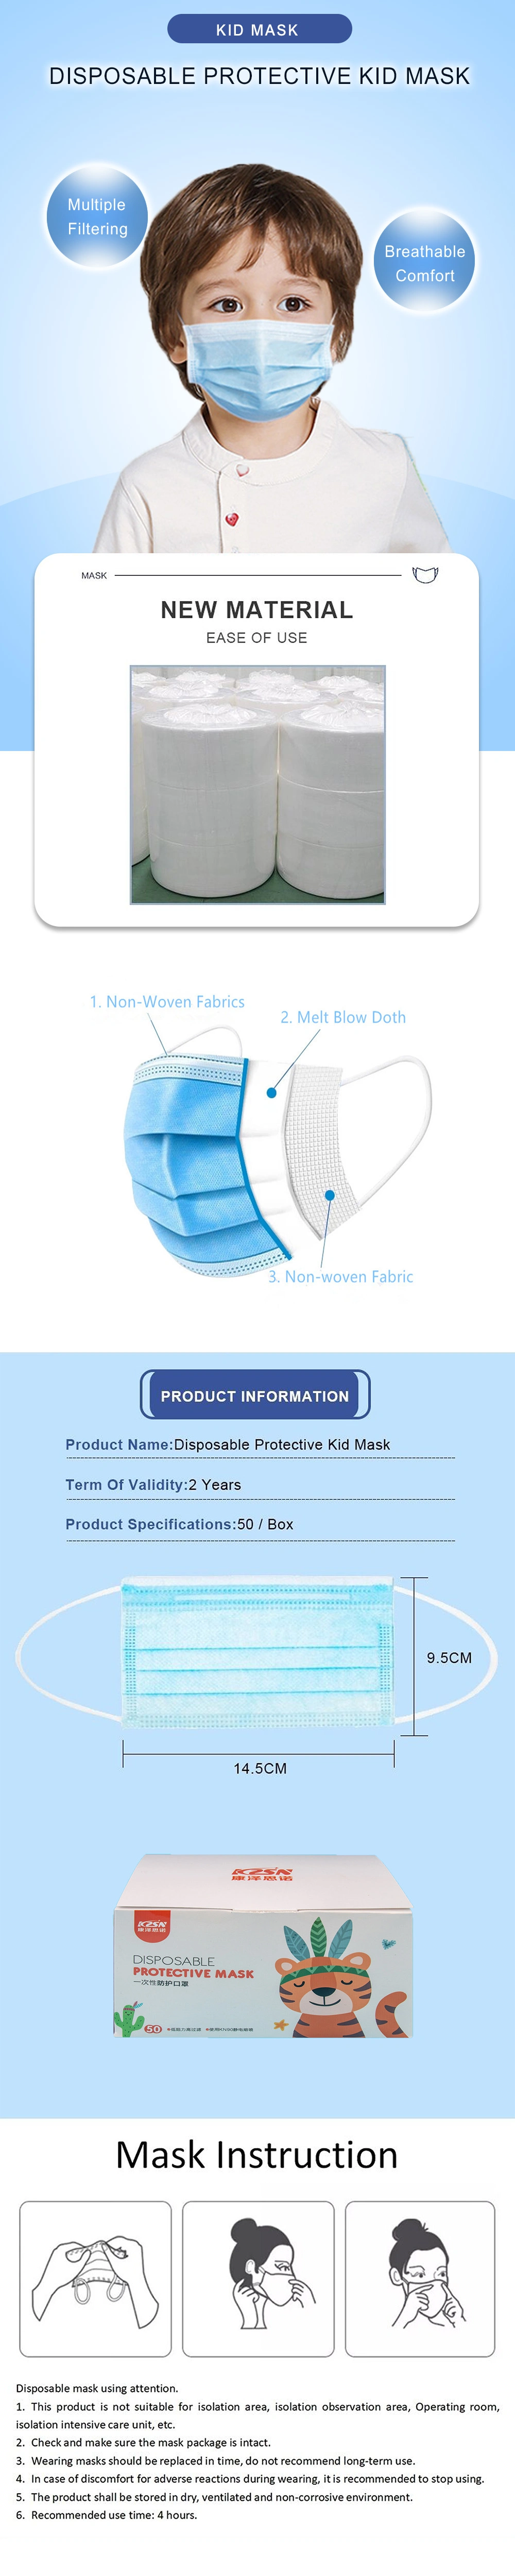 Kids Earloop Mask Face, 3ply Disposable Face Mask Disposable for Children